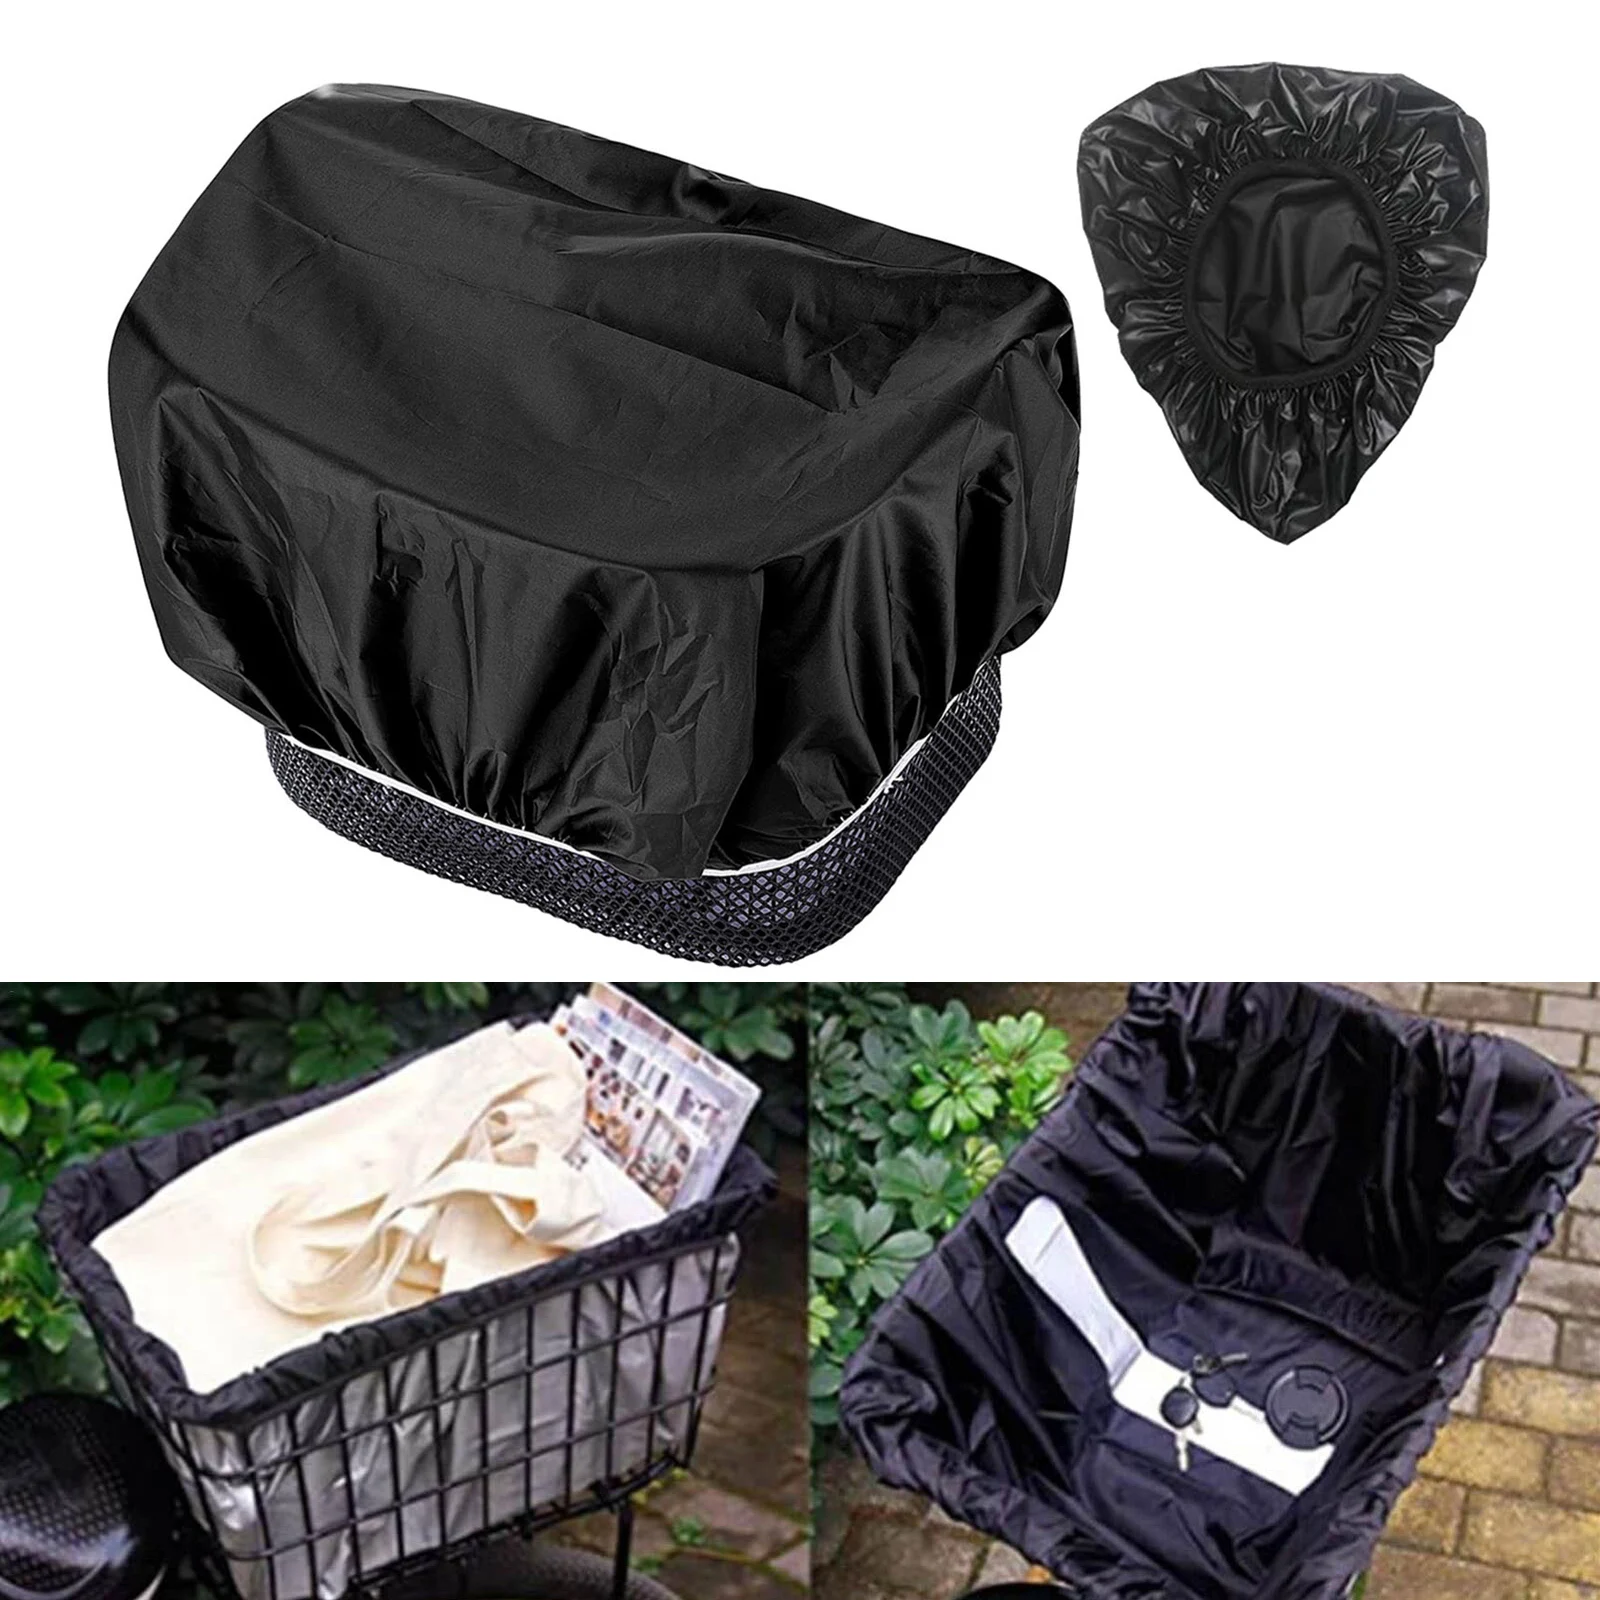 

Durable Bike Cover Saddle And Basket 200g/set Black Oxford Cloth Rainproof Waterproof For Most Bicycle Baskets